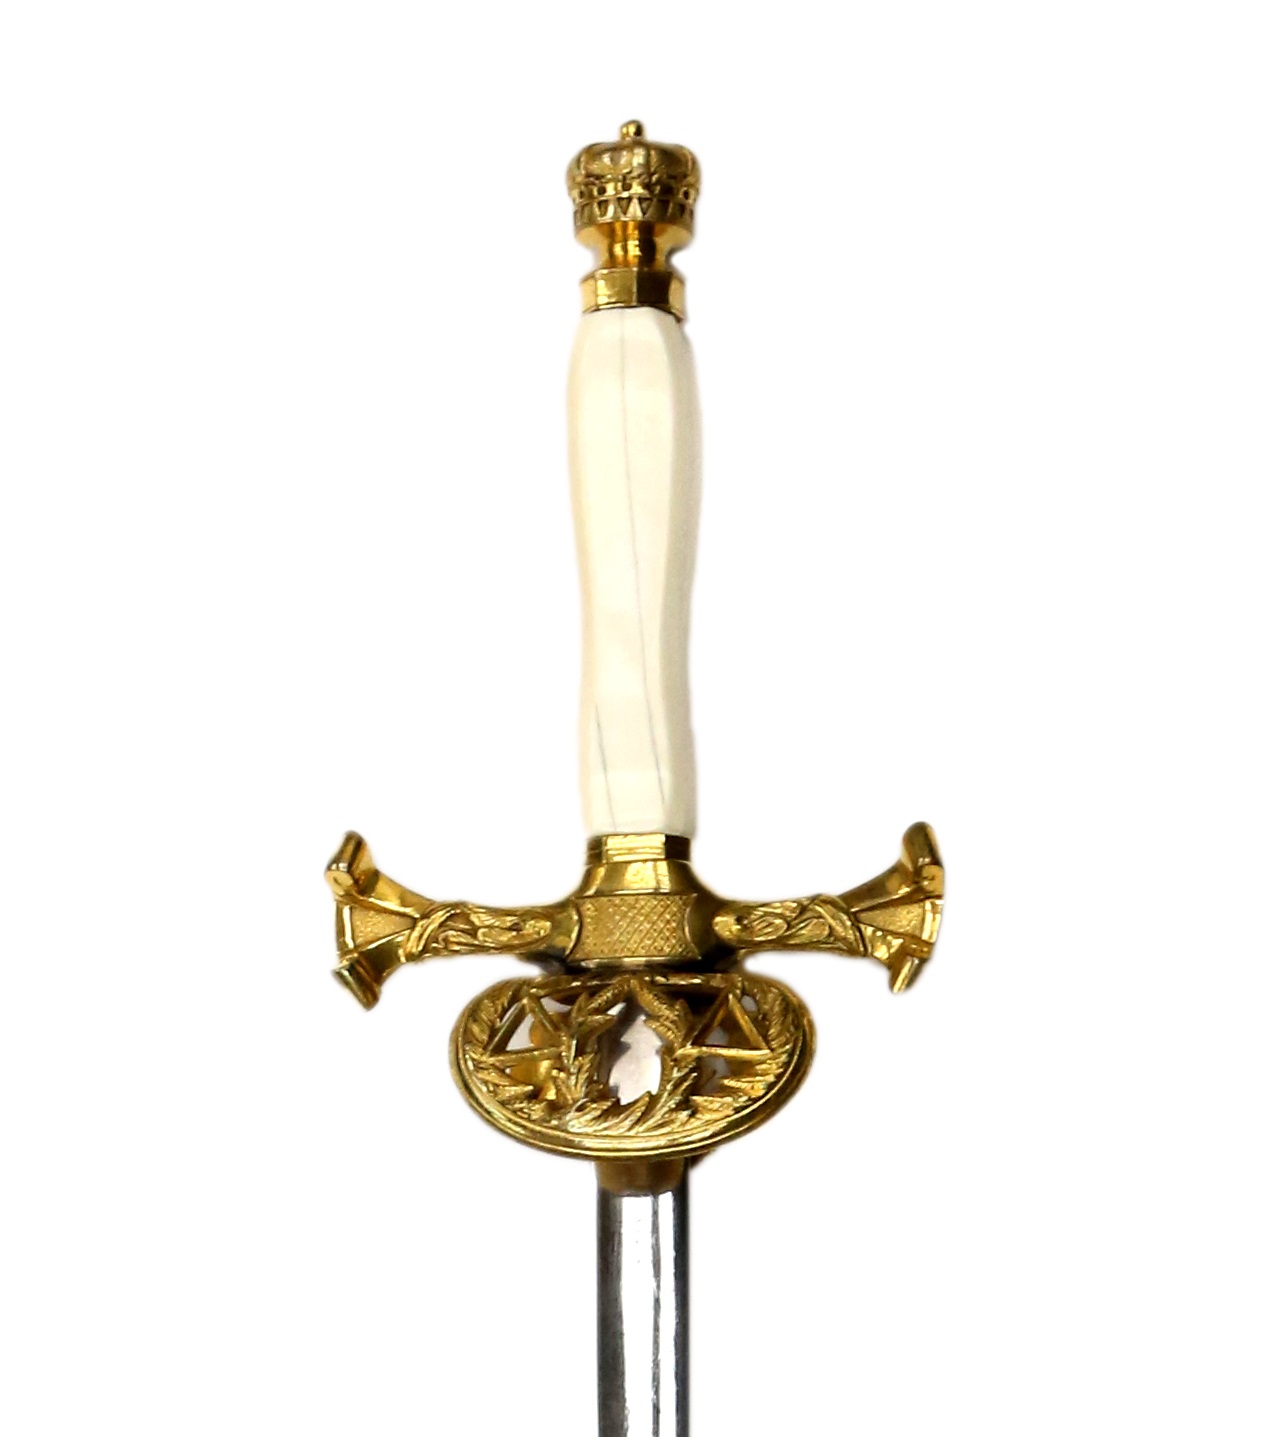 Picture of Sergeant-at-Arms Sword used from 1867 to 1924